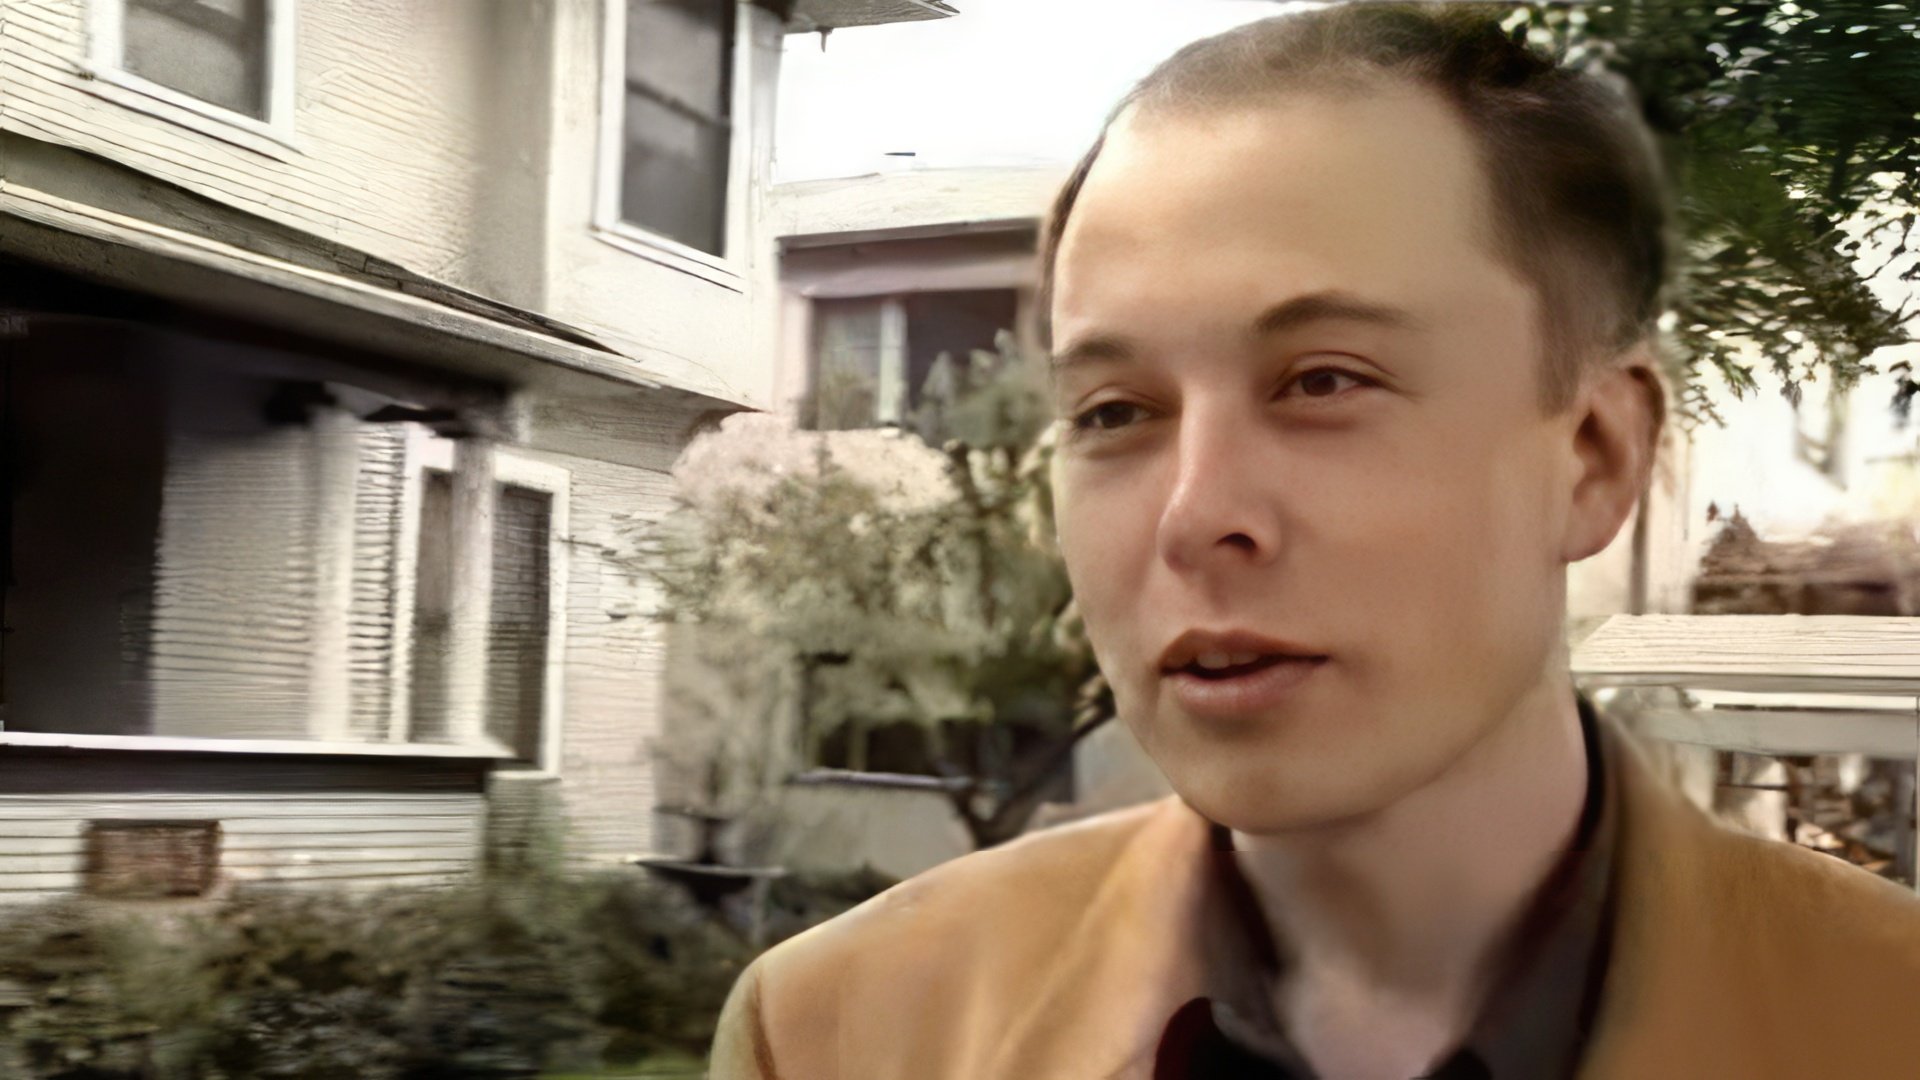 Elon Musk before becoming famous